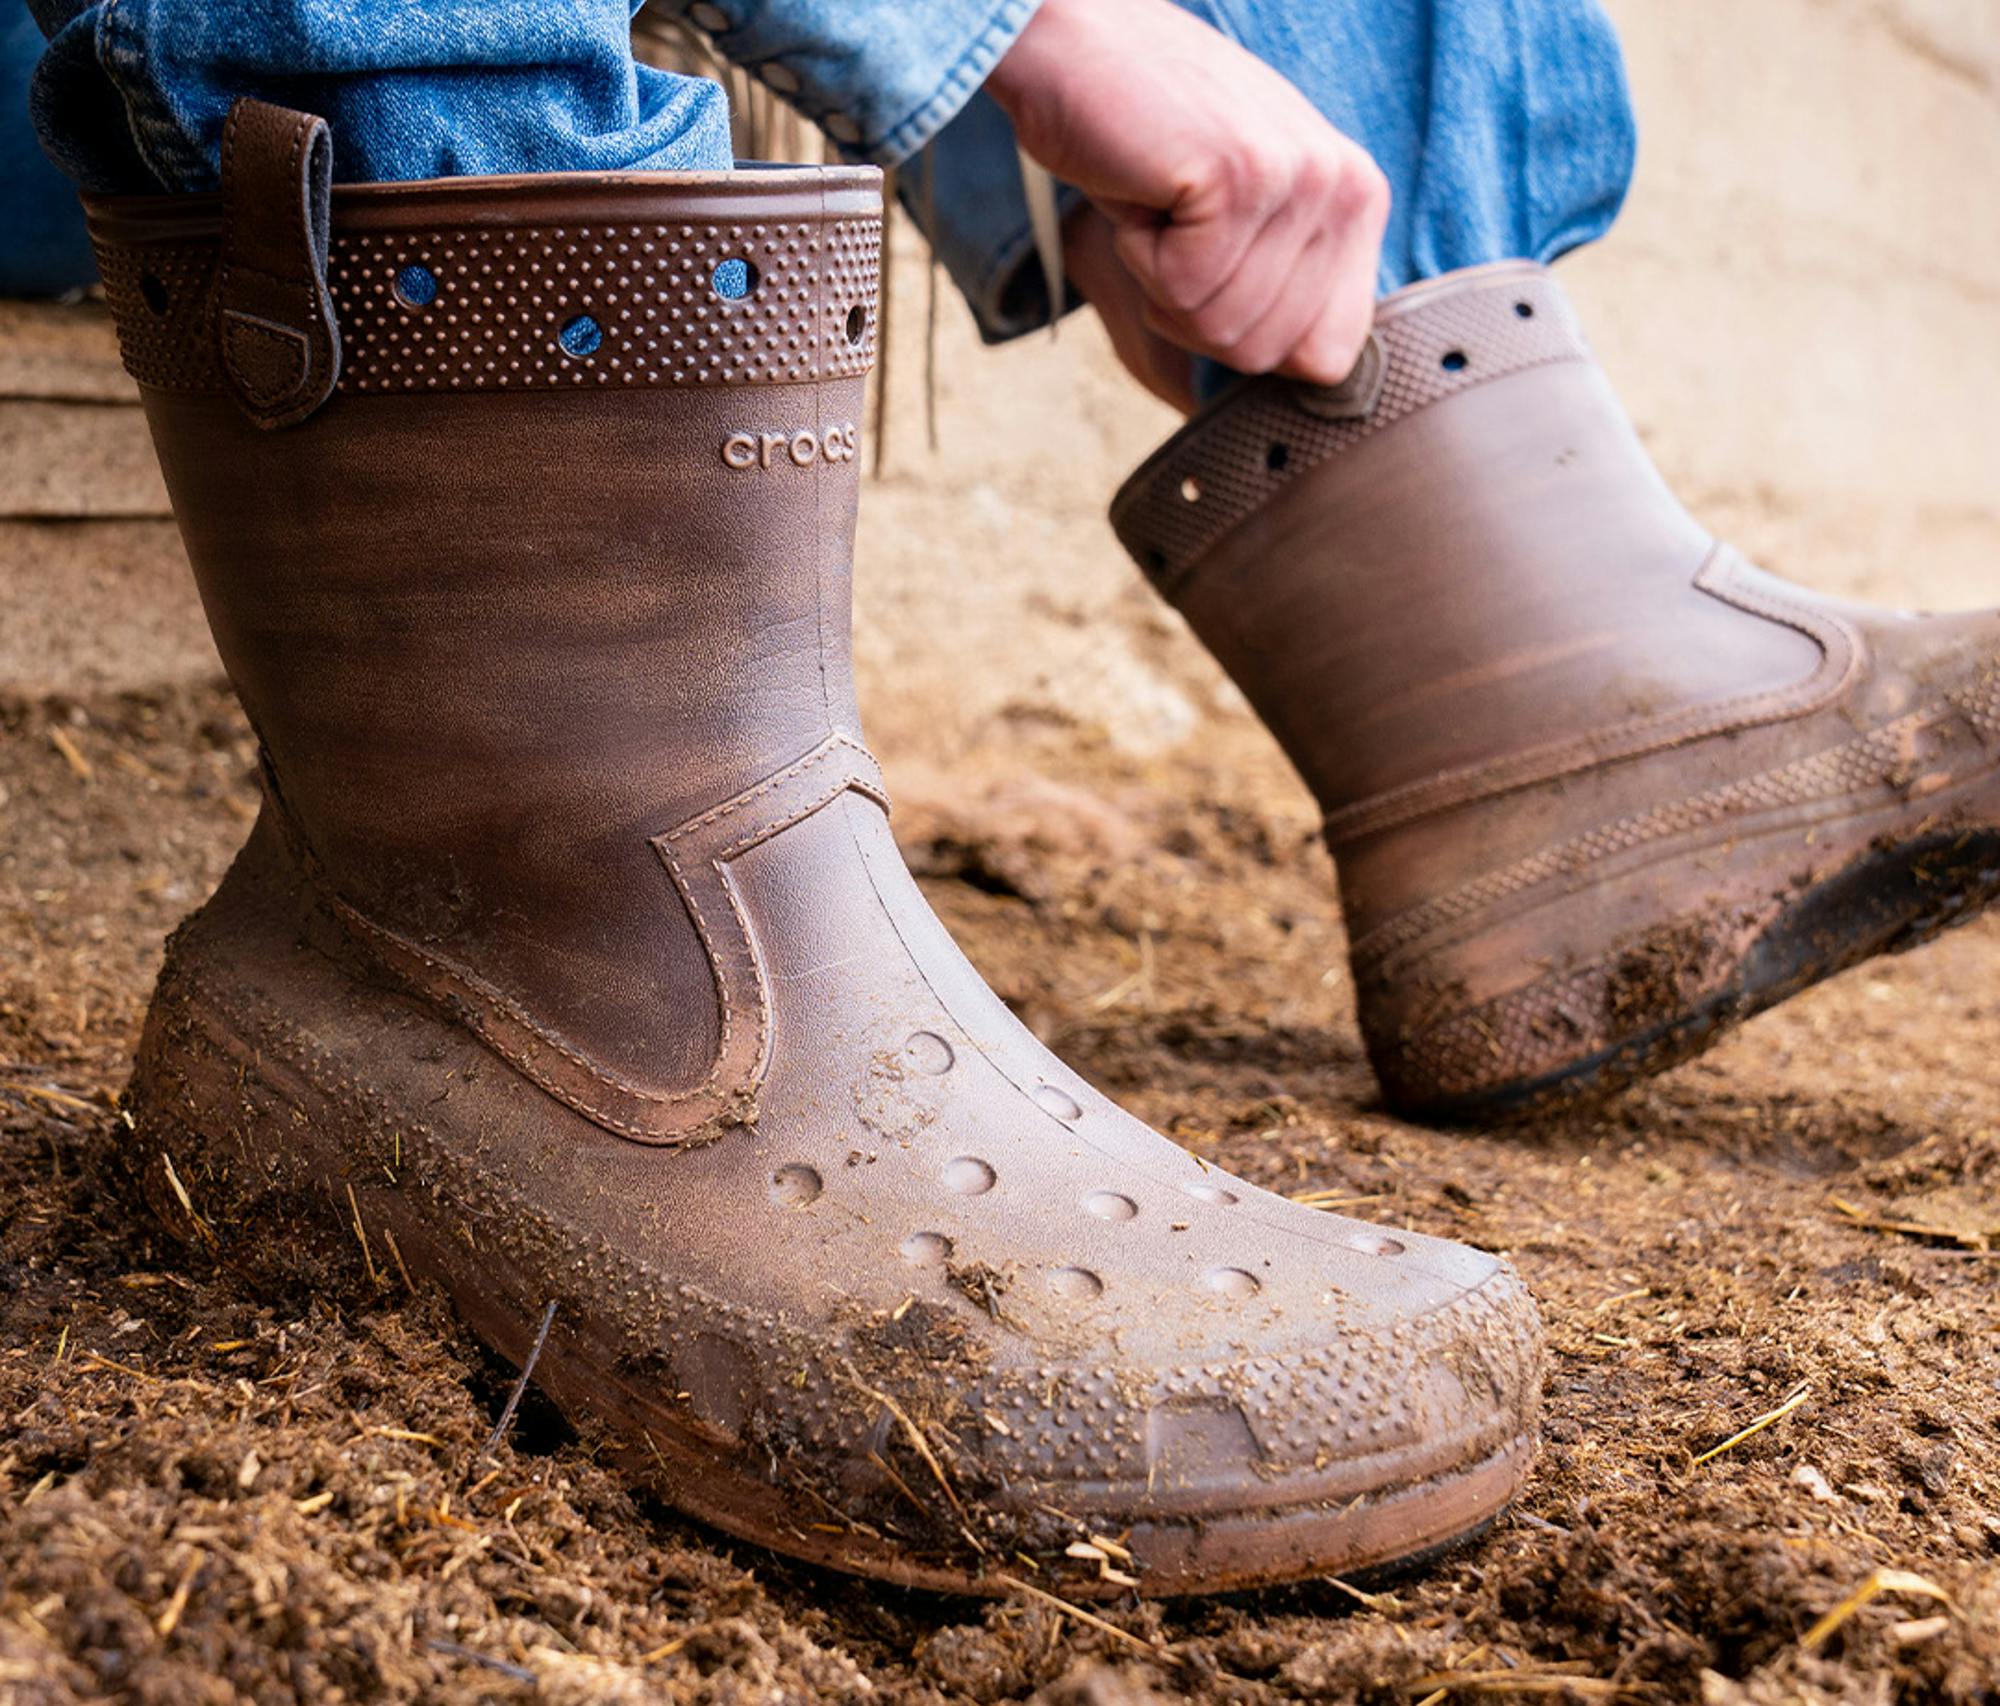 Crocs Cowboy Boots Are Available Now for Free - The Krazy Coupon Lady